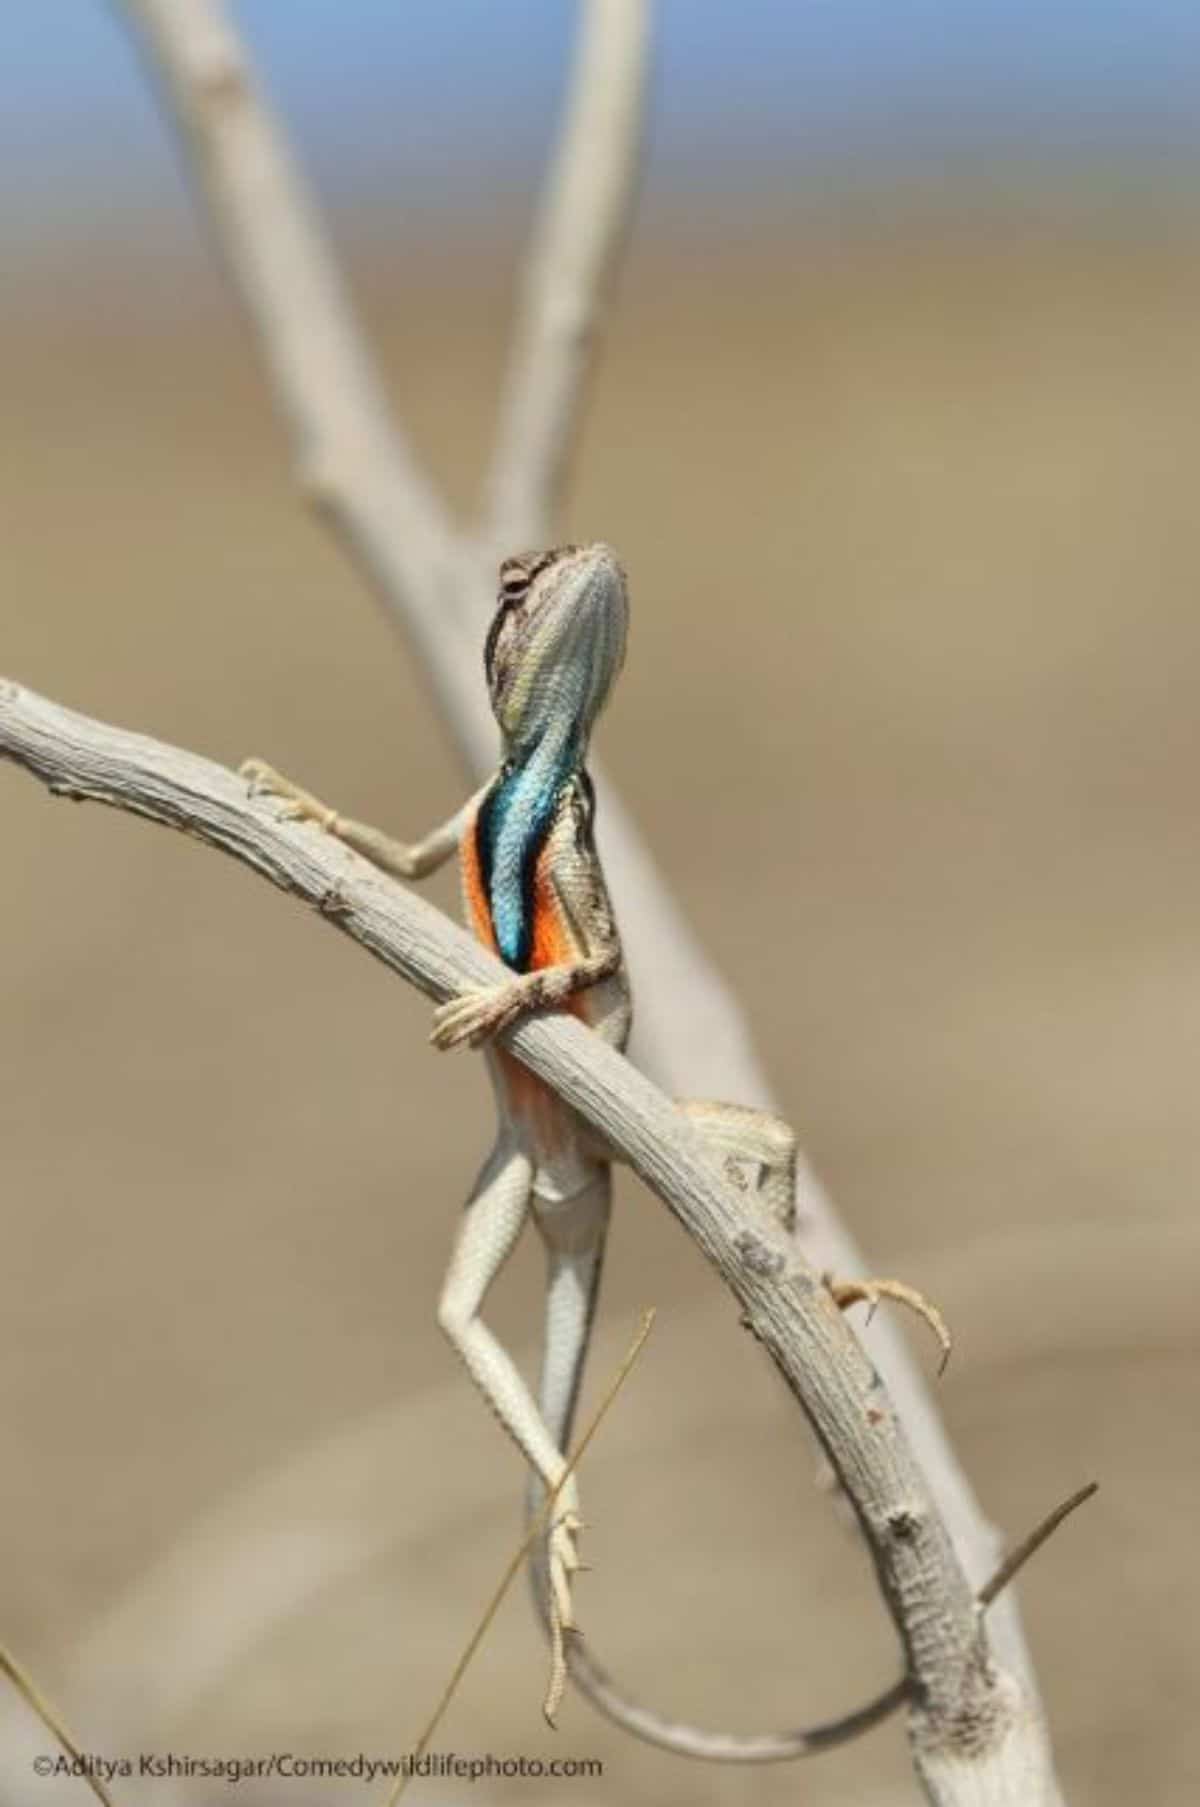 grey blue and orange lizard standing while holding onto a tree branch